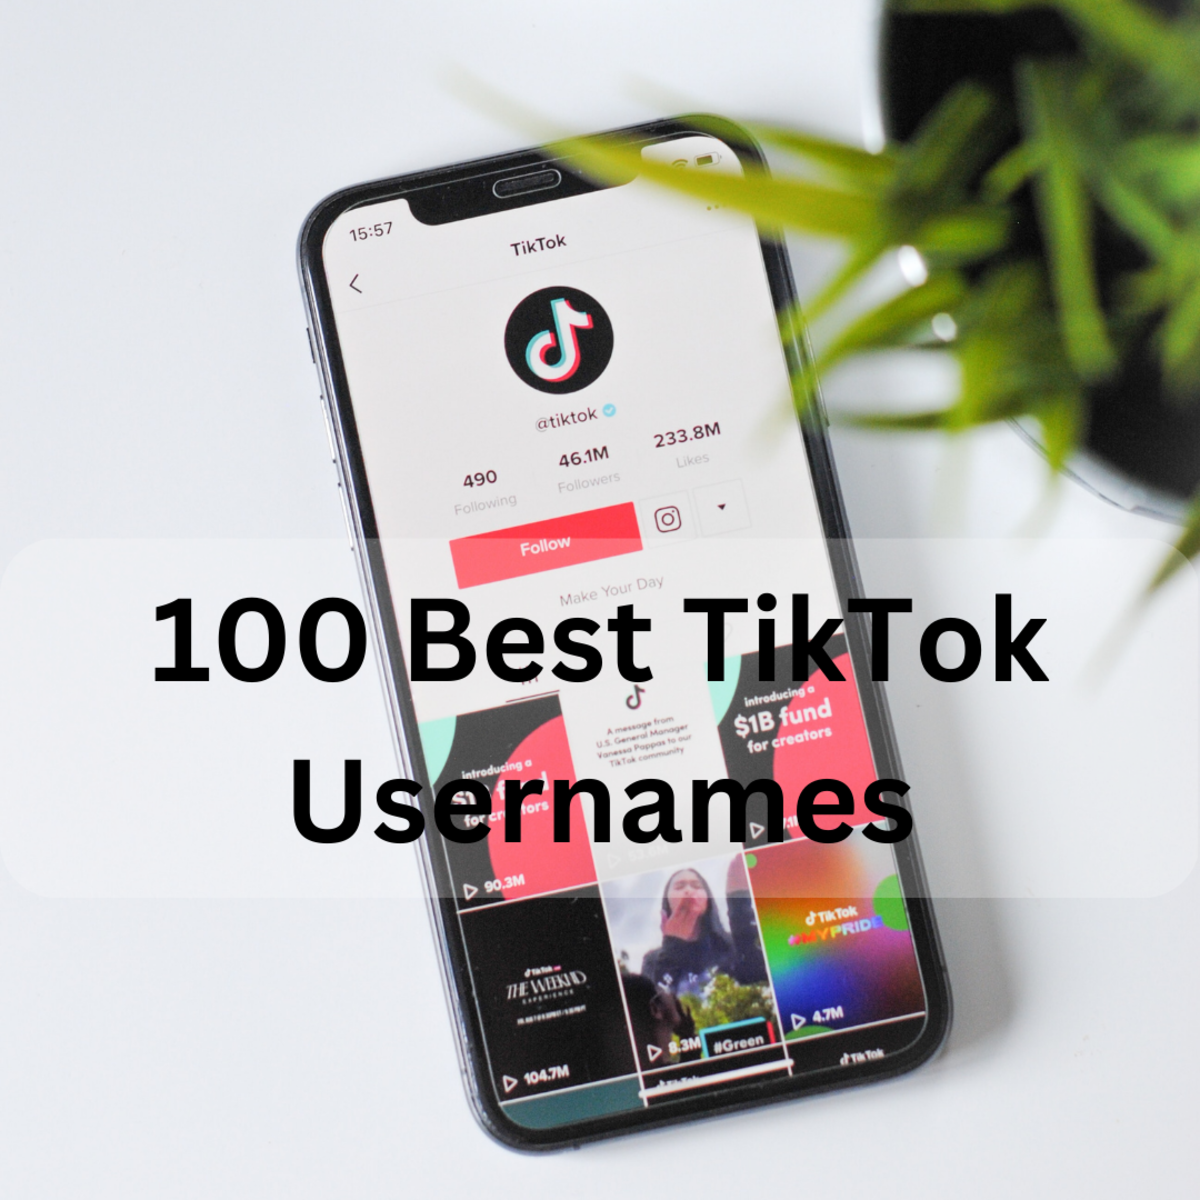 "Find your perfect TikTok username from our top 100 list!"